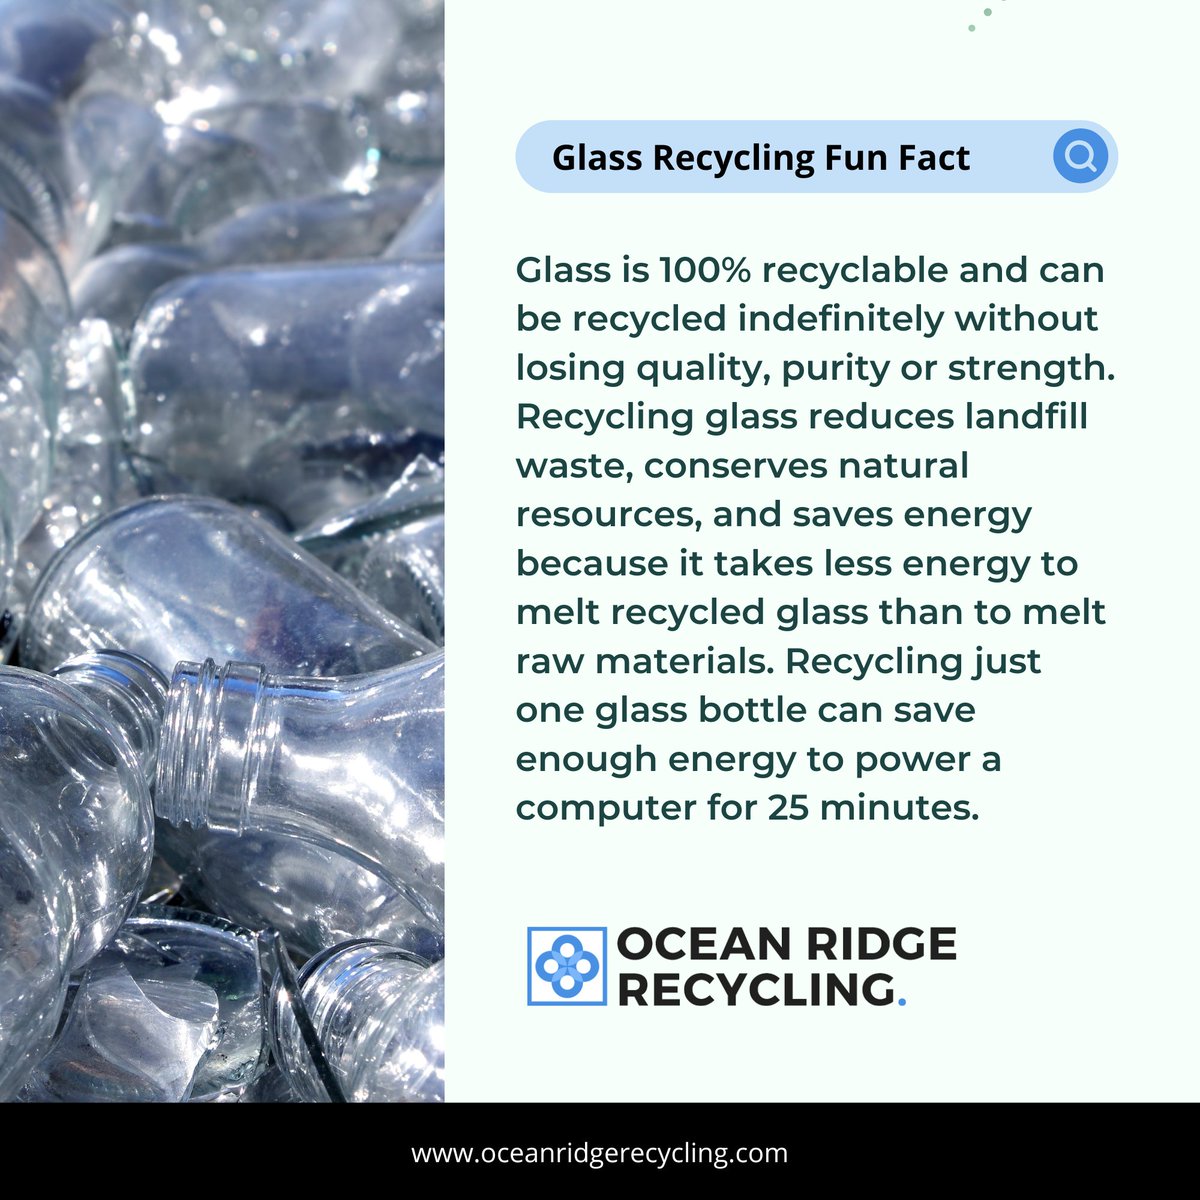 Glass Recycling Fun Fact!

Take action towards a sustainable future. Contact us today at info@oceanridgerecycling.com or call us at +1 (800) 277-3680 to get started.

#oceanridgerecycling #sustainablefuture #wastefree #ecofriendly #recyclingsolutions #sustainabilitymatters